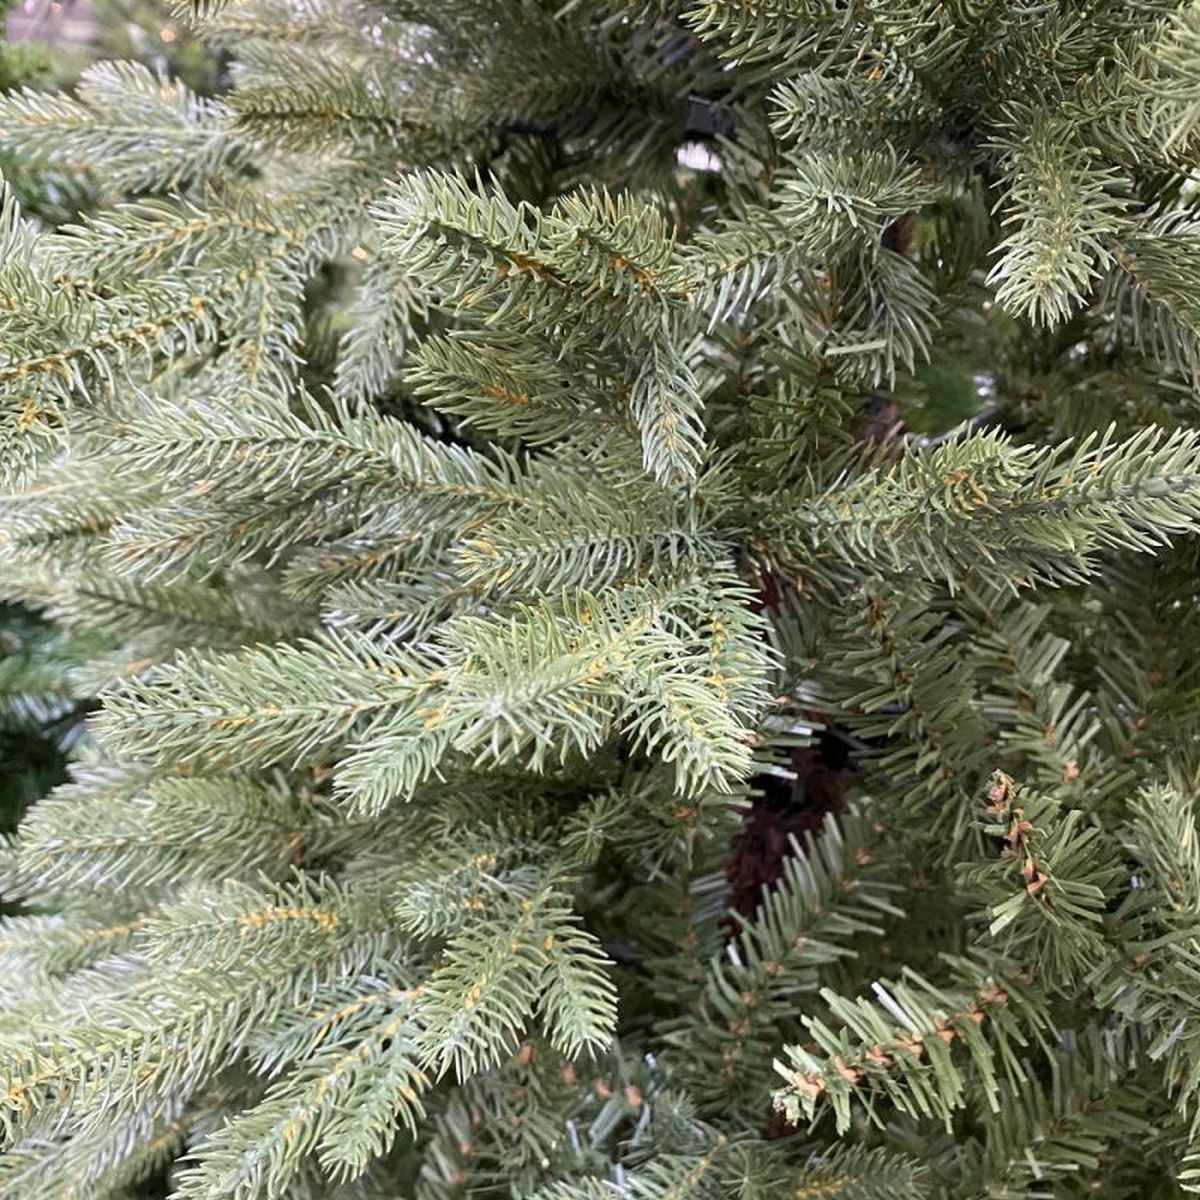 6FT Barrington Spruce Puleo Artificial Christmas Tree | AT96